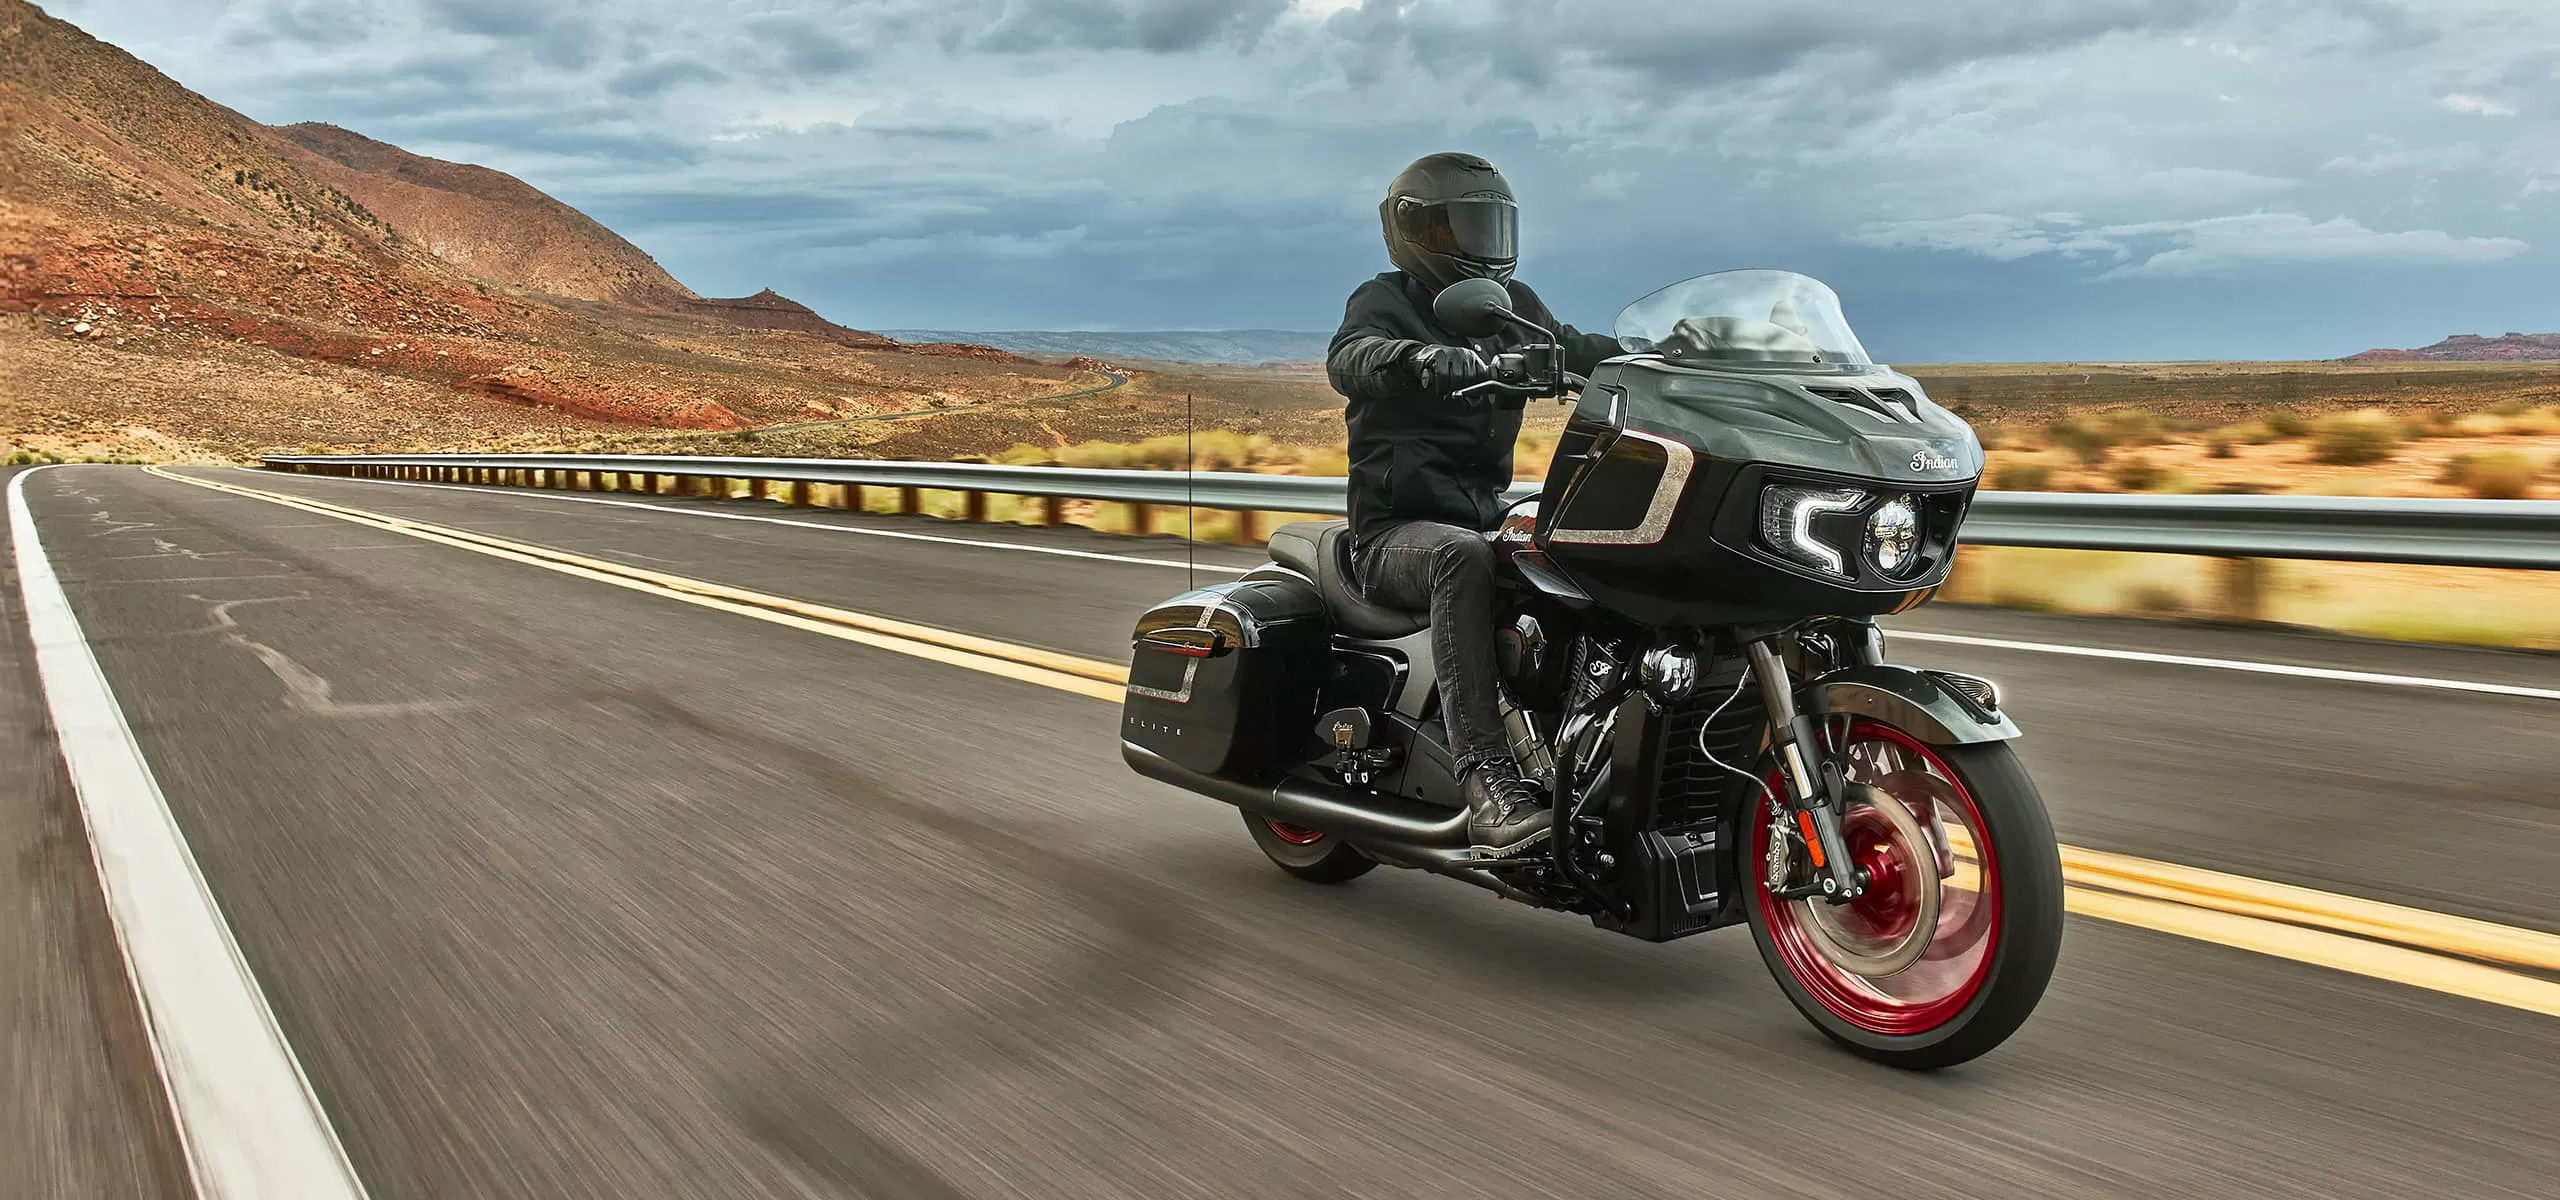 Indian Motorcycles Challenger Elite available at Robinsons Foundry